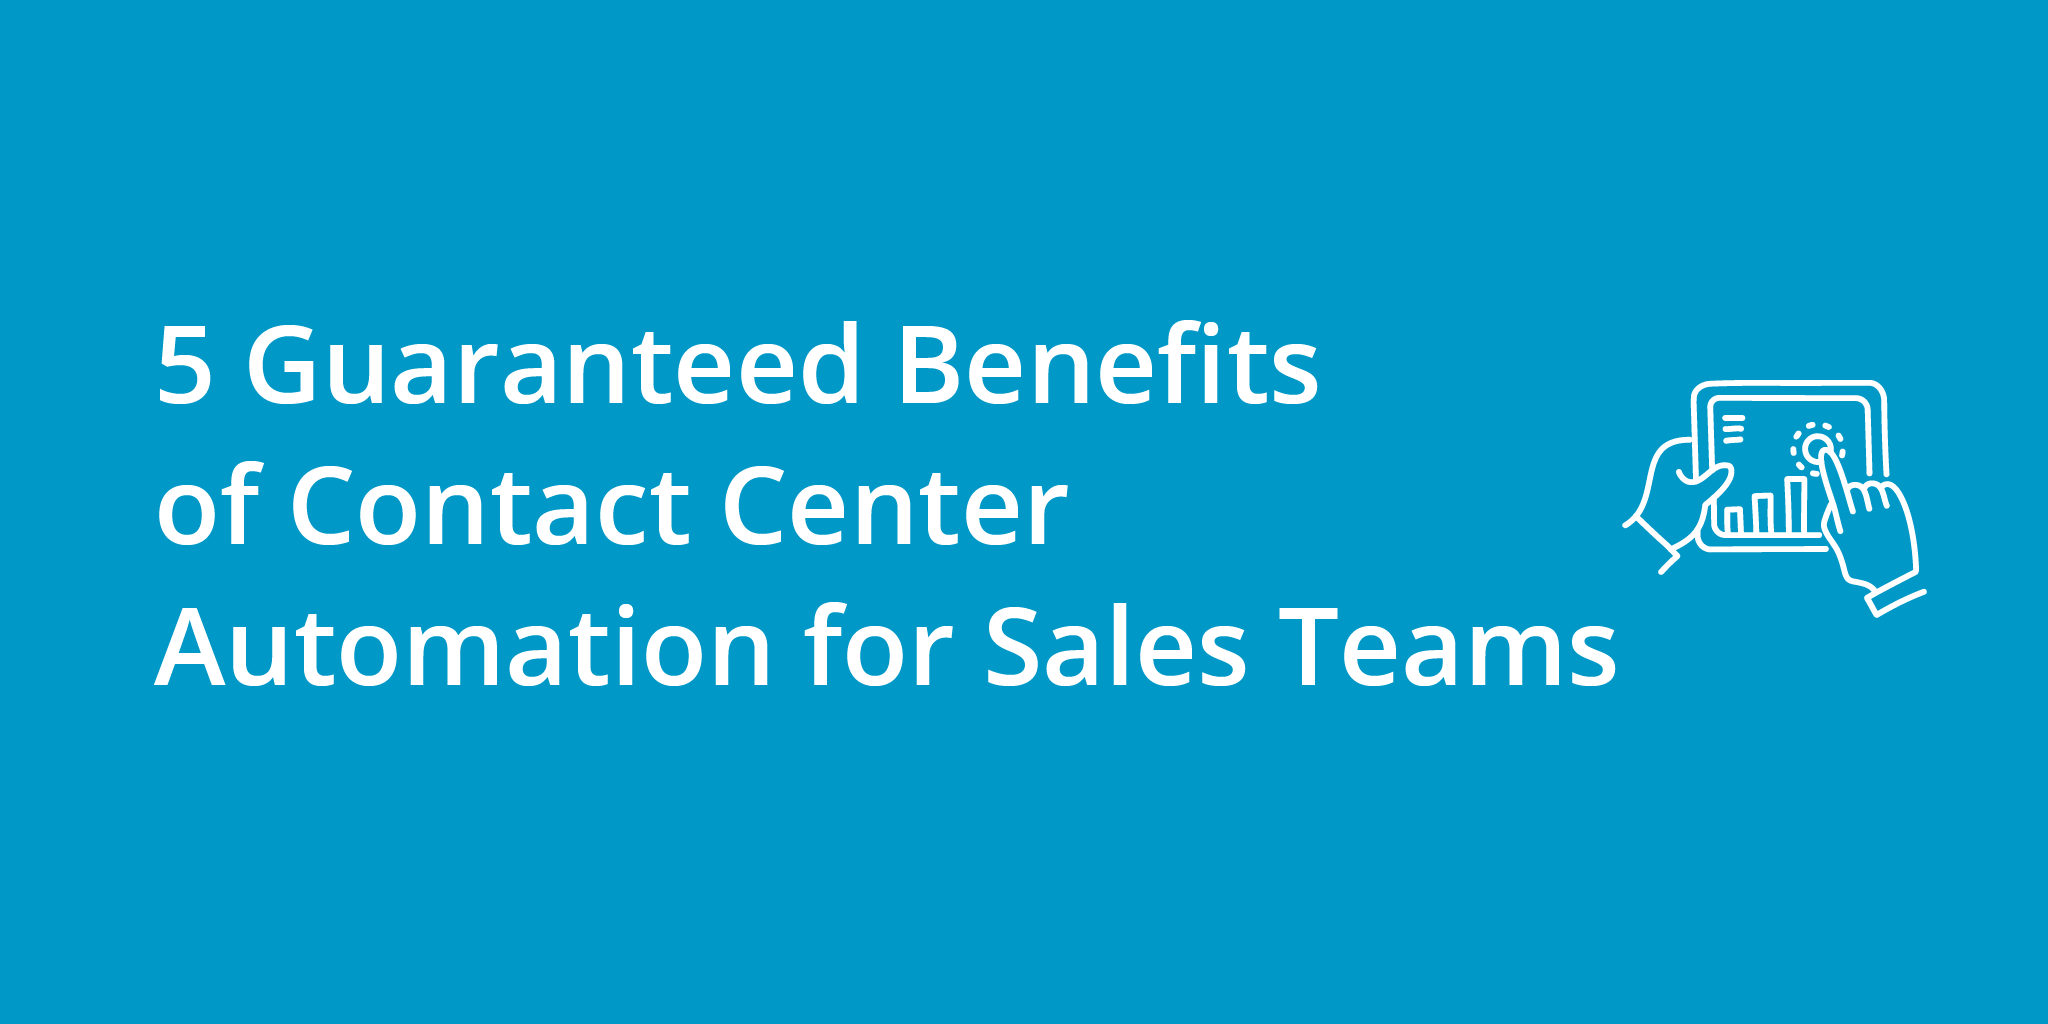 5 Guaranteed Benefits of Contact Center Automation for Sales Teams | Telephones for business